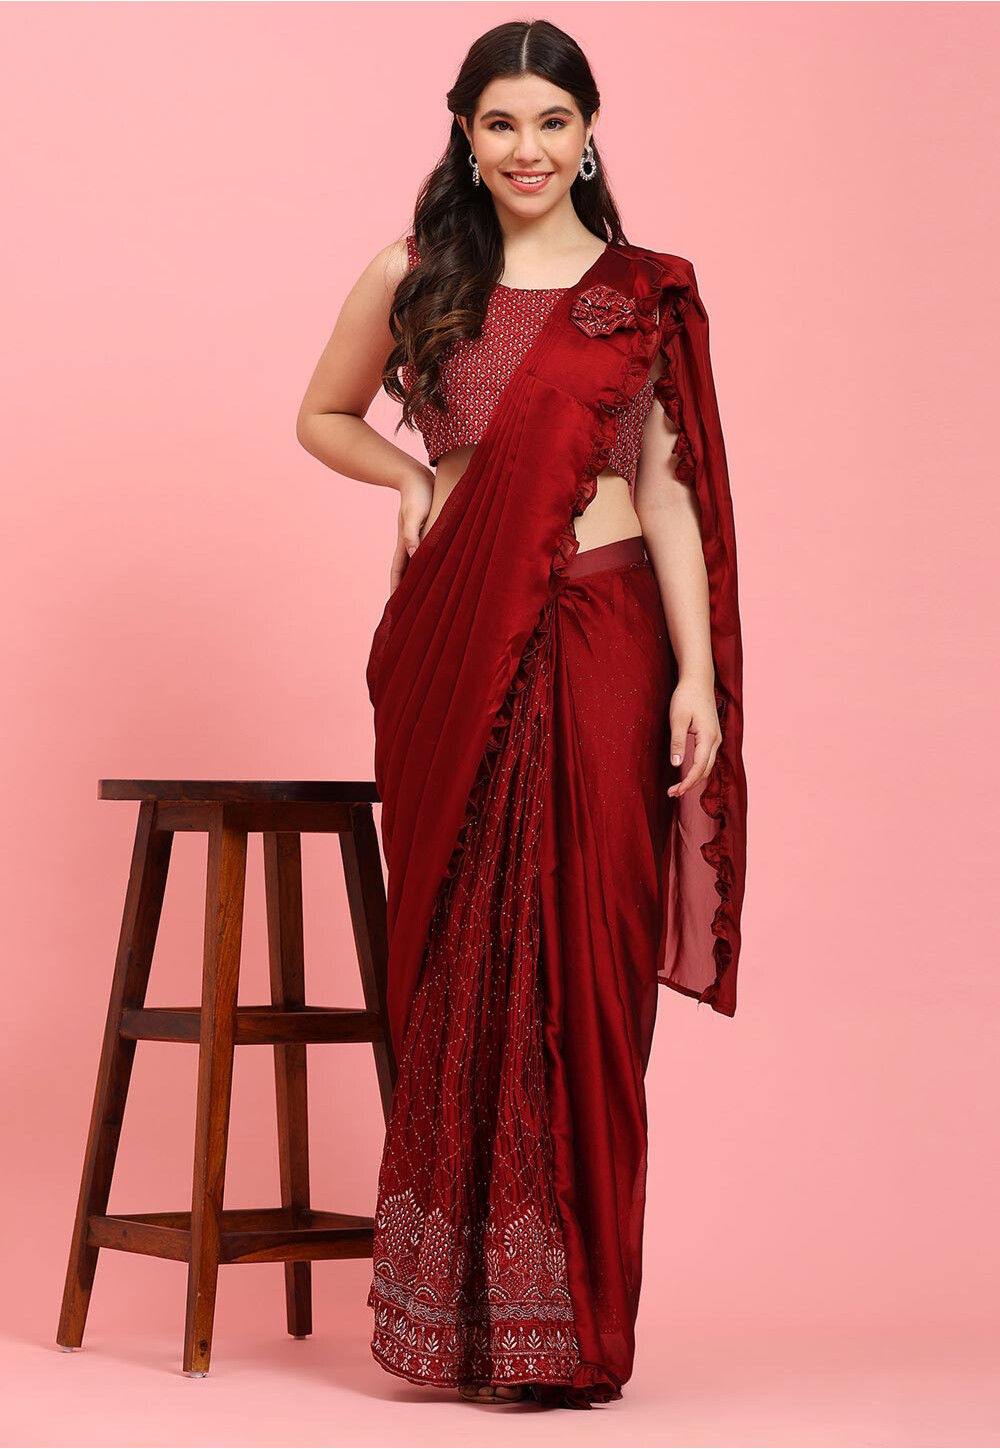 Maroon Colour Organza Silk Saree With Embroidery Work at Rs 2770.00 |  Surat| ID: 2850501531530